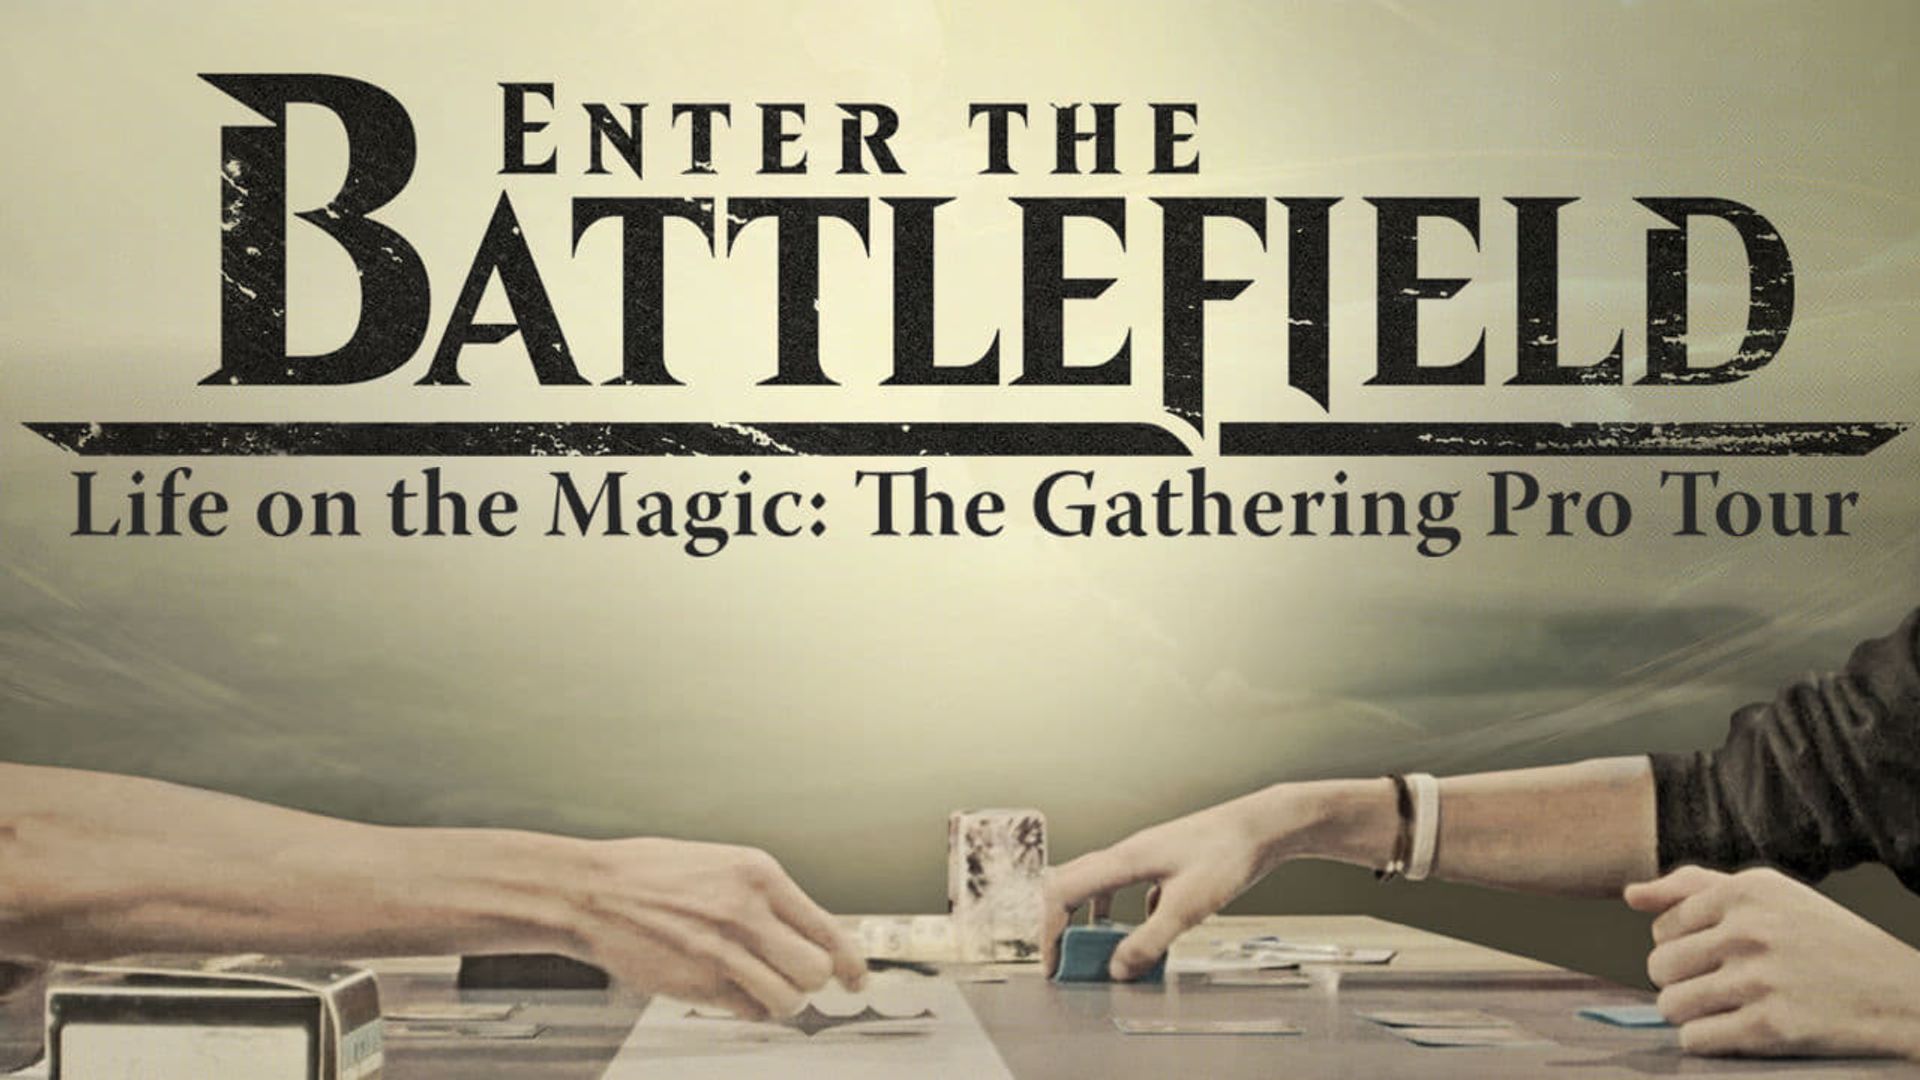 Enter the Battlefield: Life on the Magic - The Gathering Pro Tour background